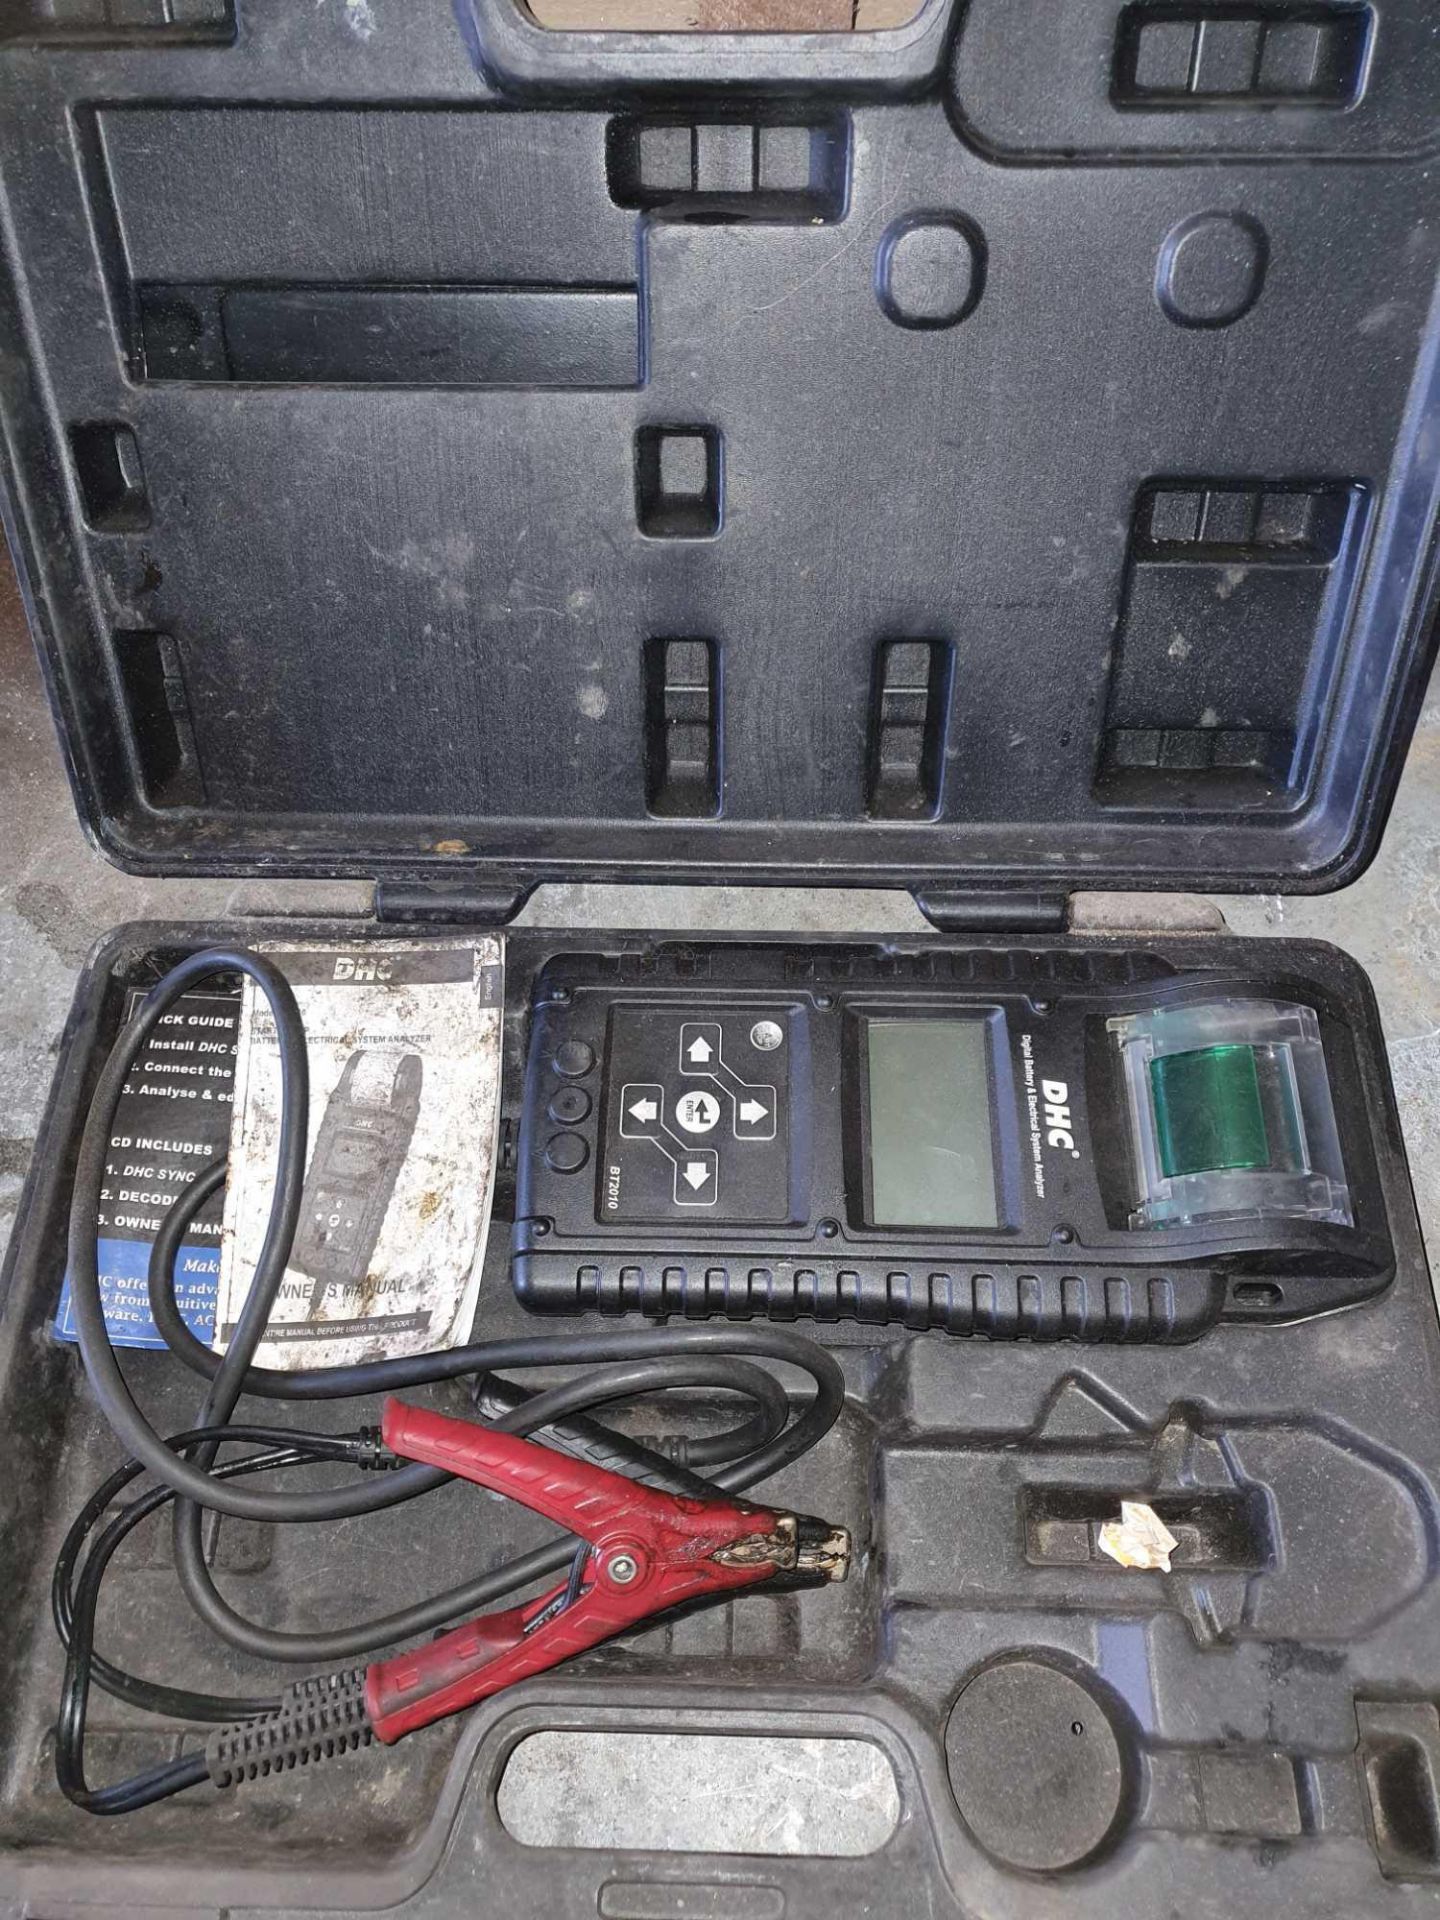 Digital battery and electrical system analyzer - Image 2 of 2